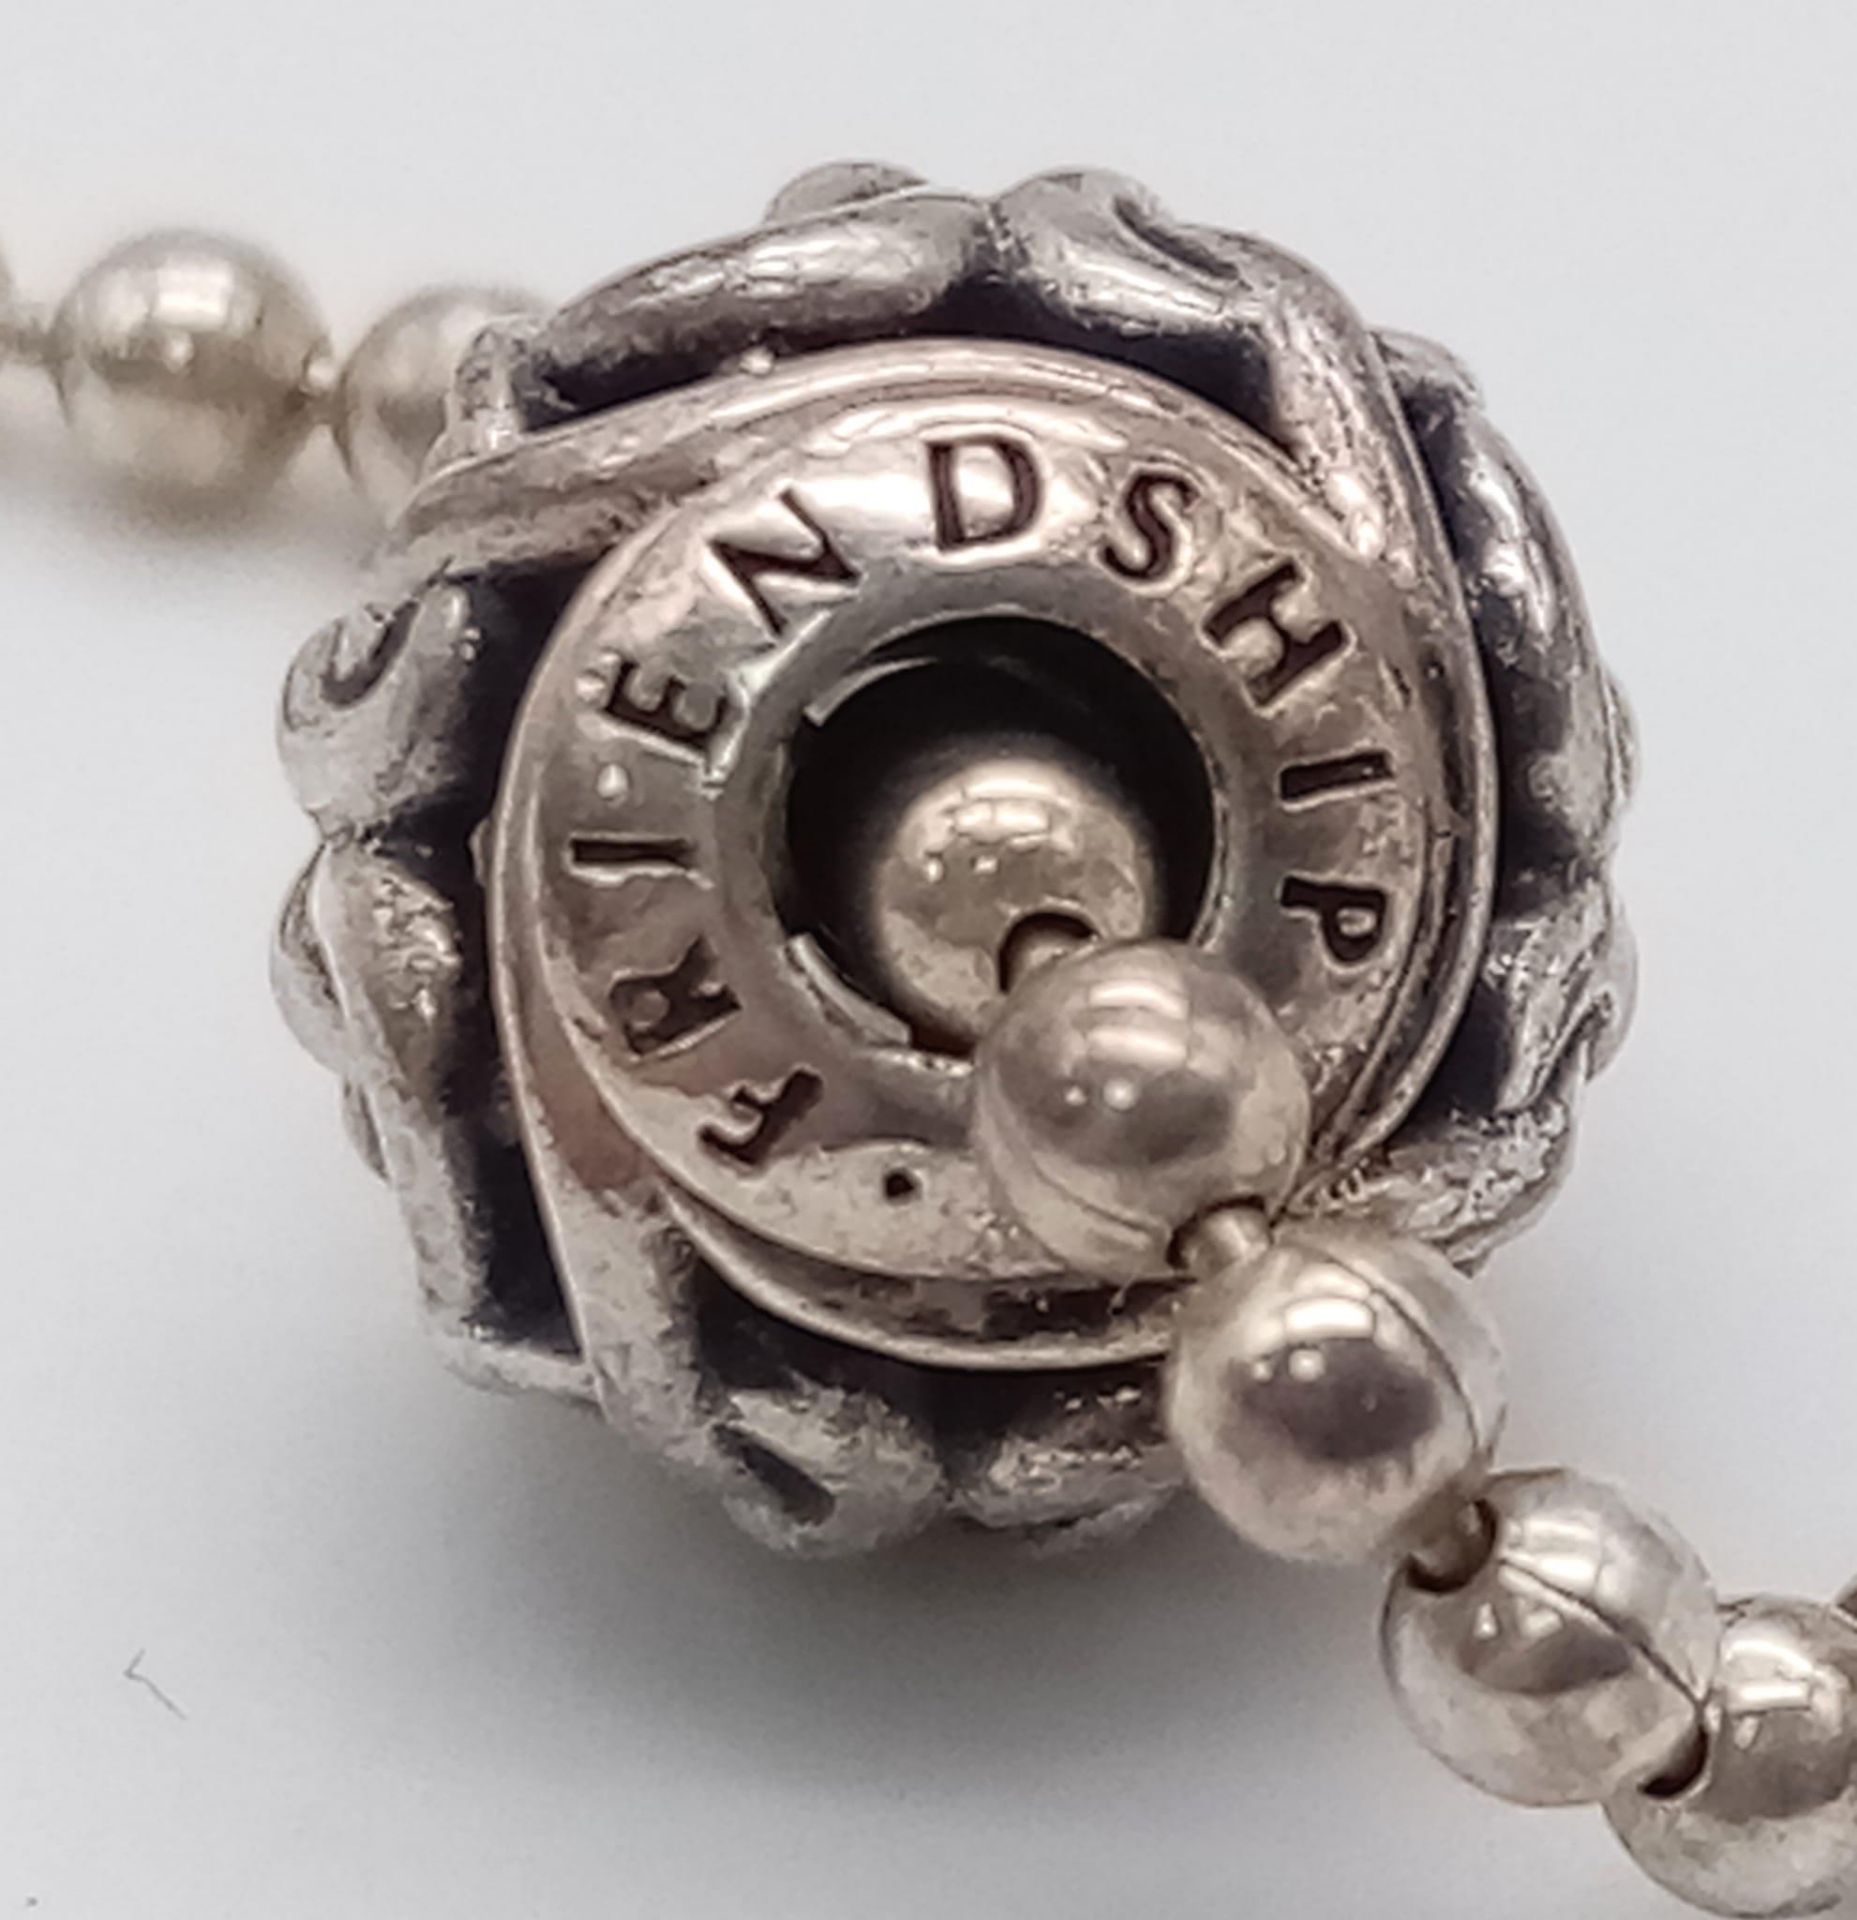 A sterling silver PANDORA friendship bracelet with two beads/charms. Weight: 6.8 g.